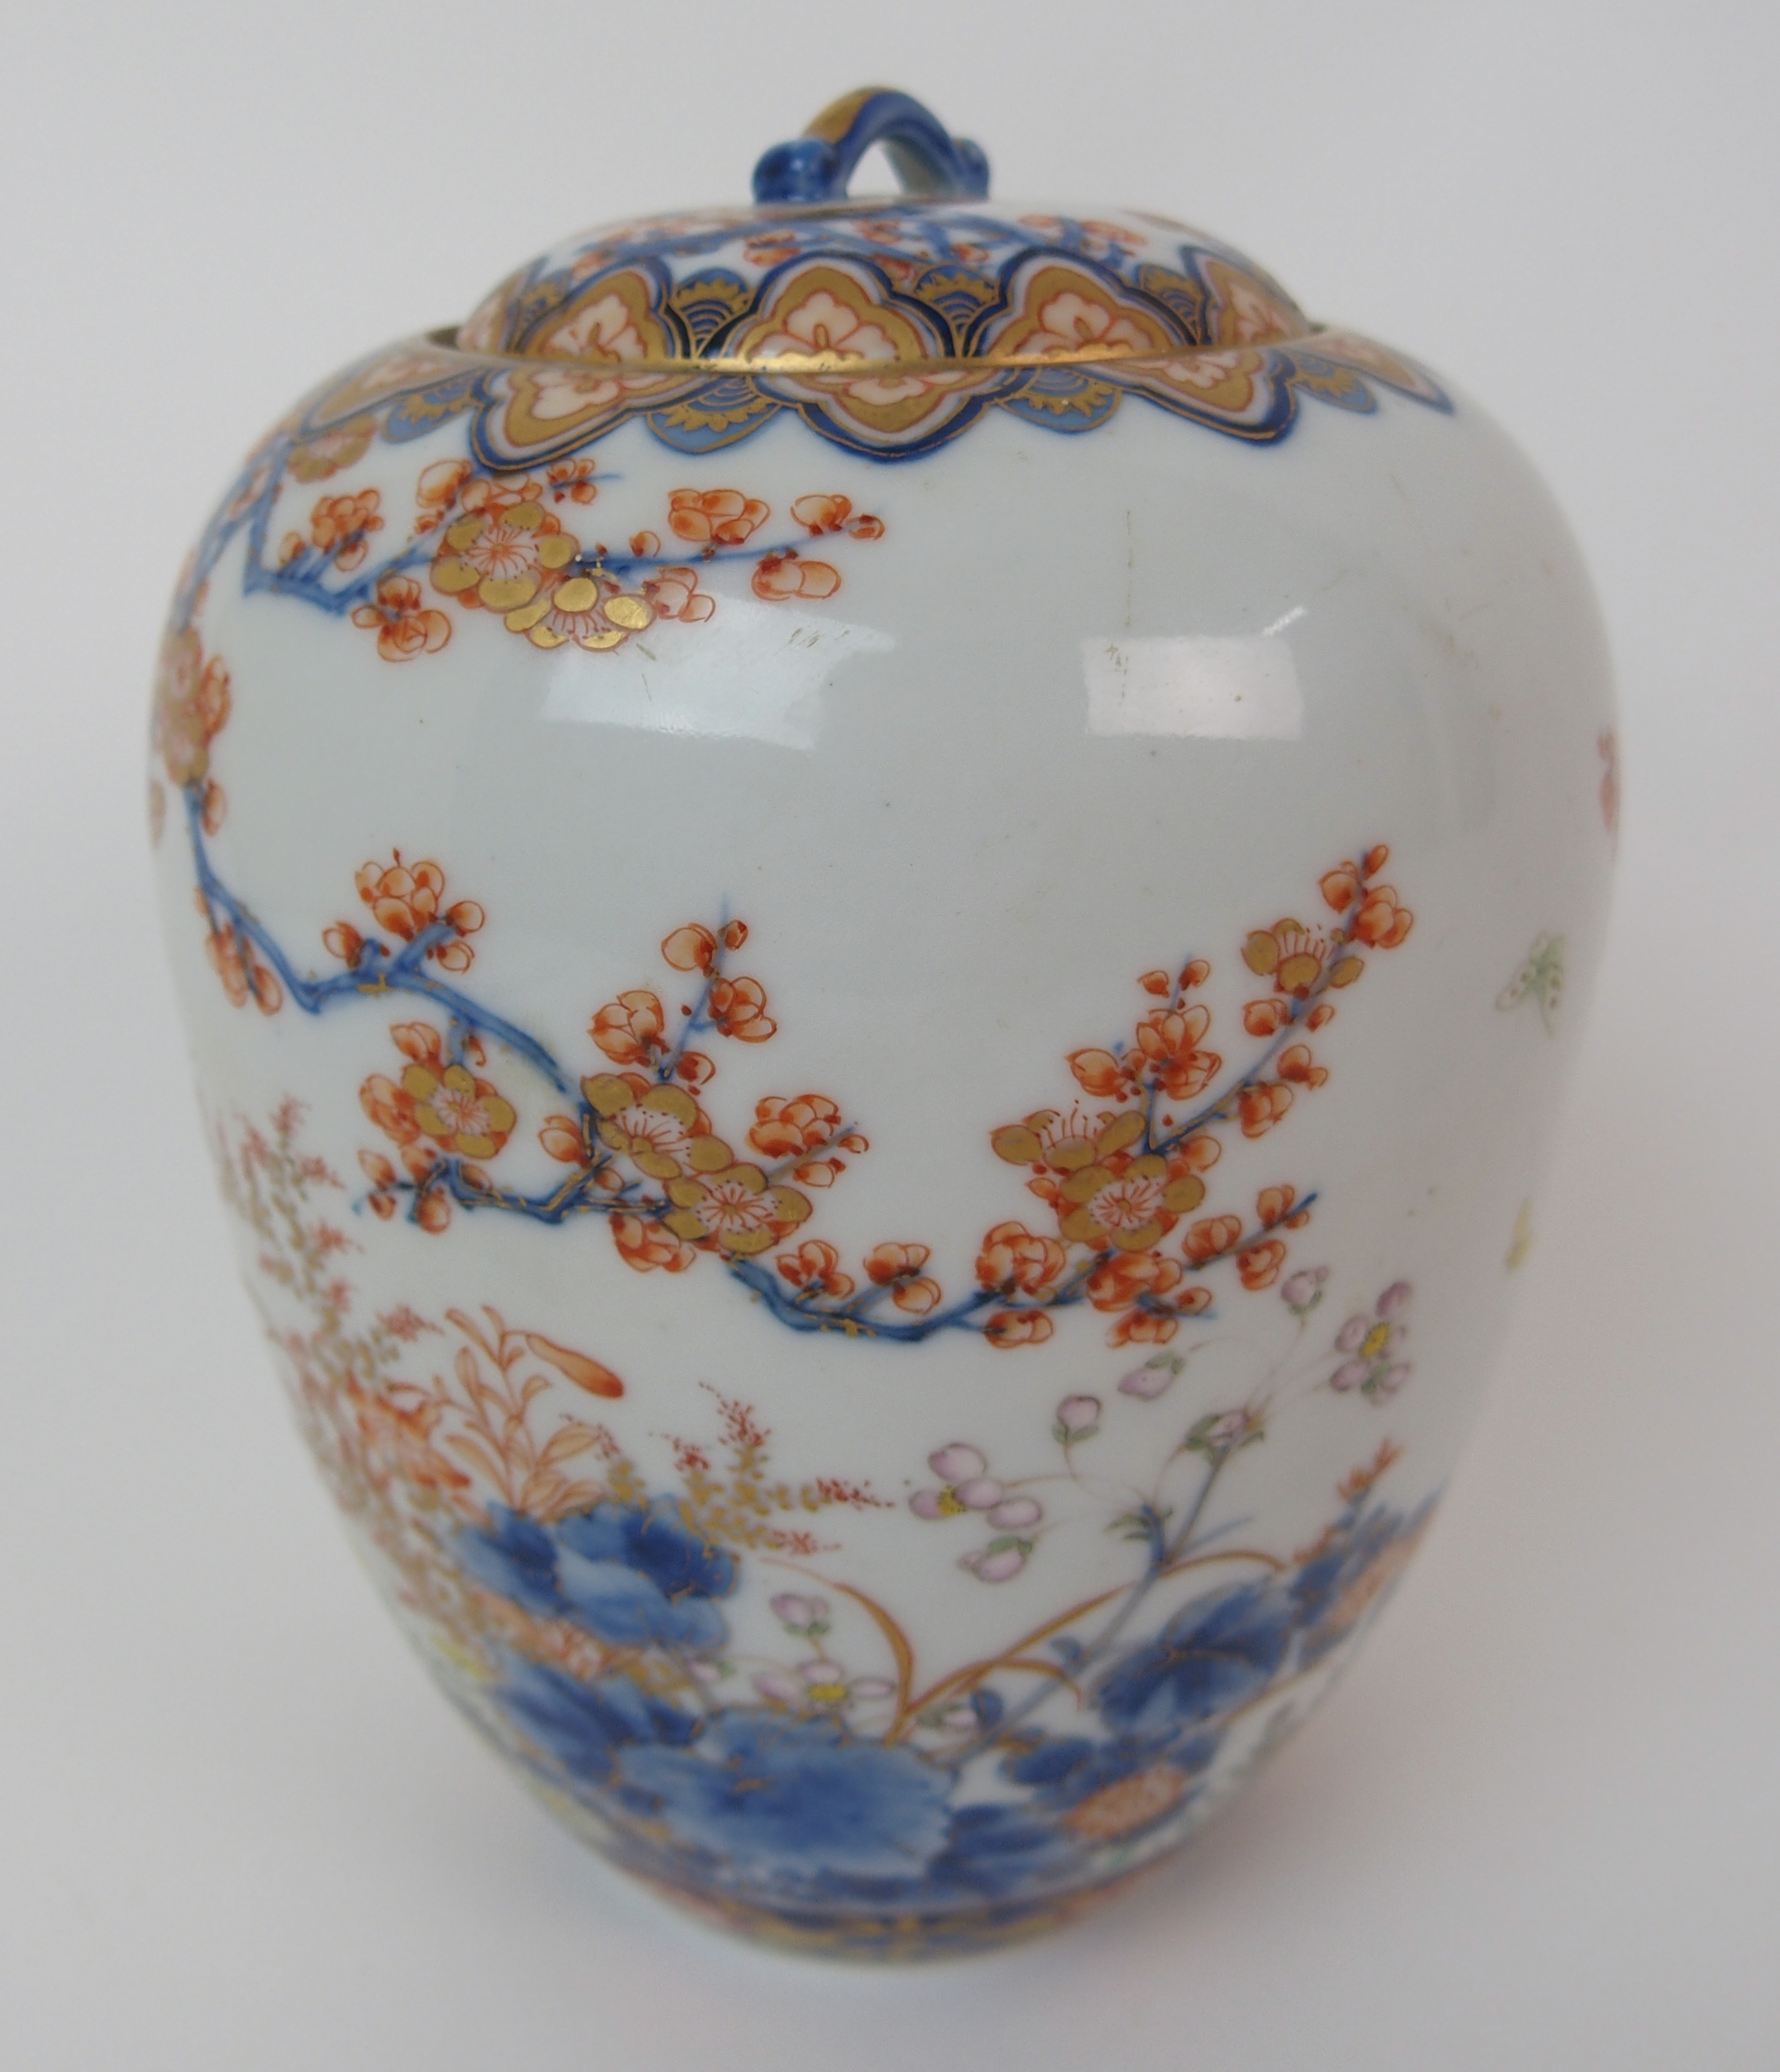 A Fukagawa oviform vase painted with various flowers and blossoming branches within foliate bands, - Image 3 of 10